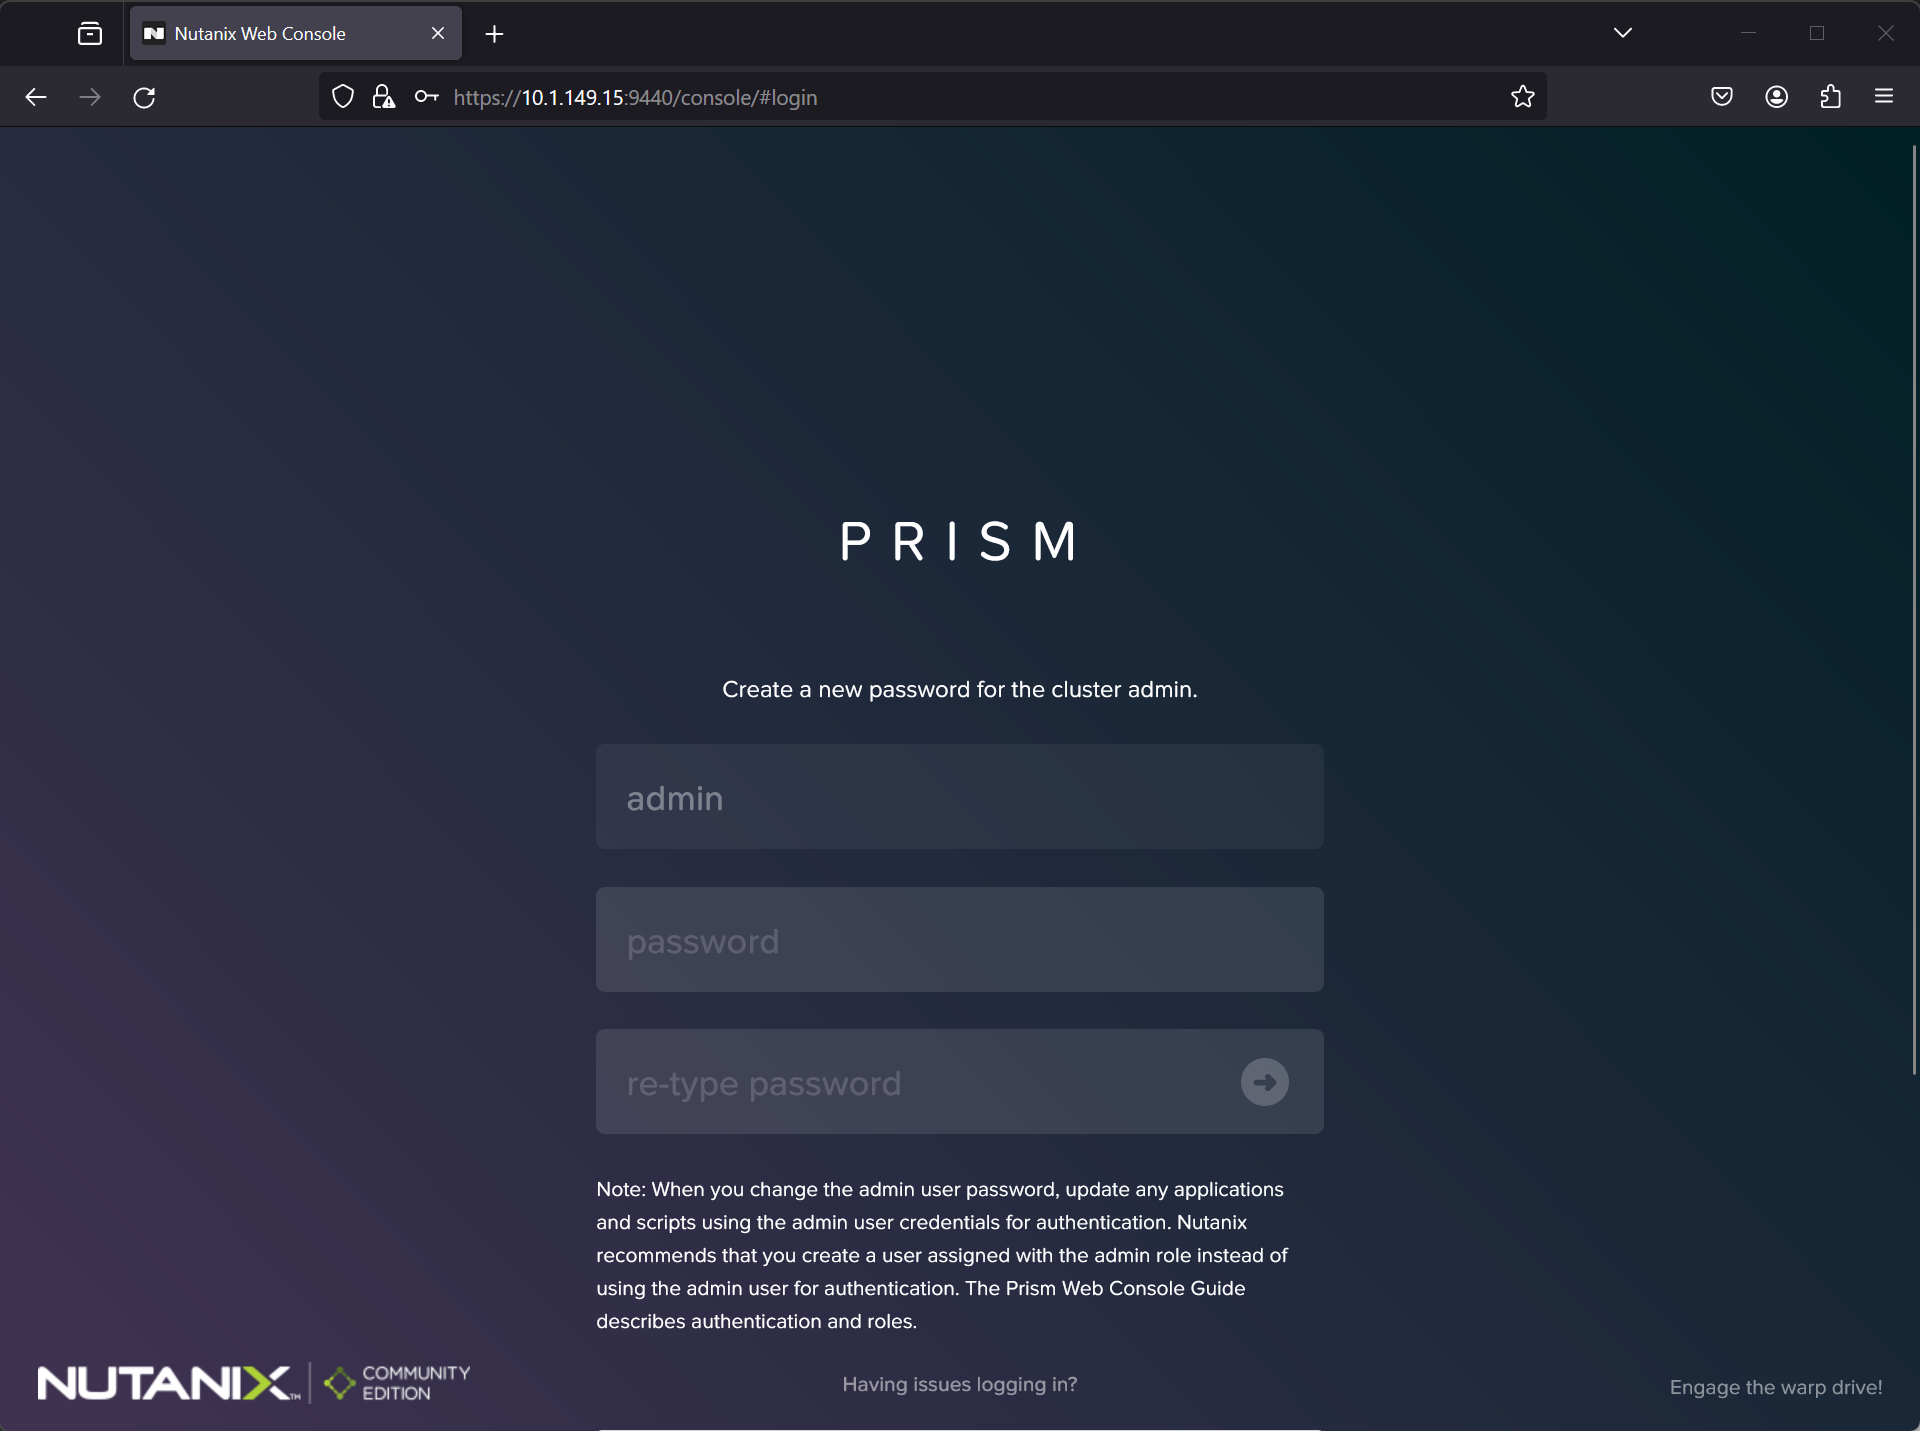 The prism web interface for nutanix community edition